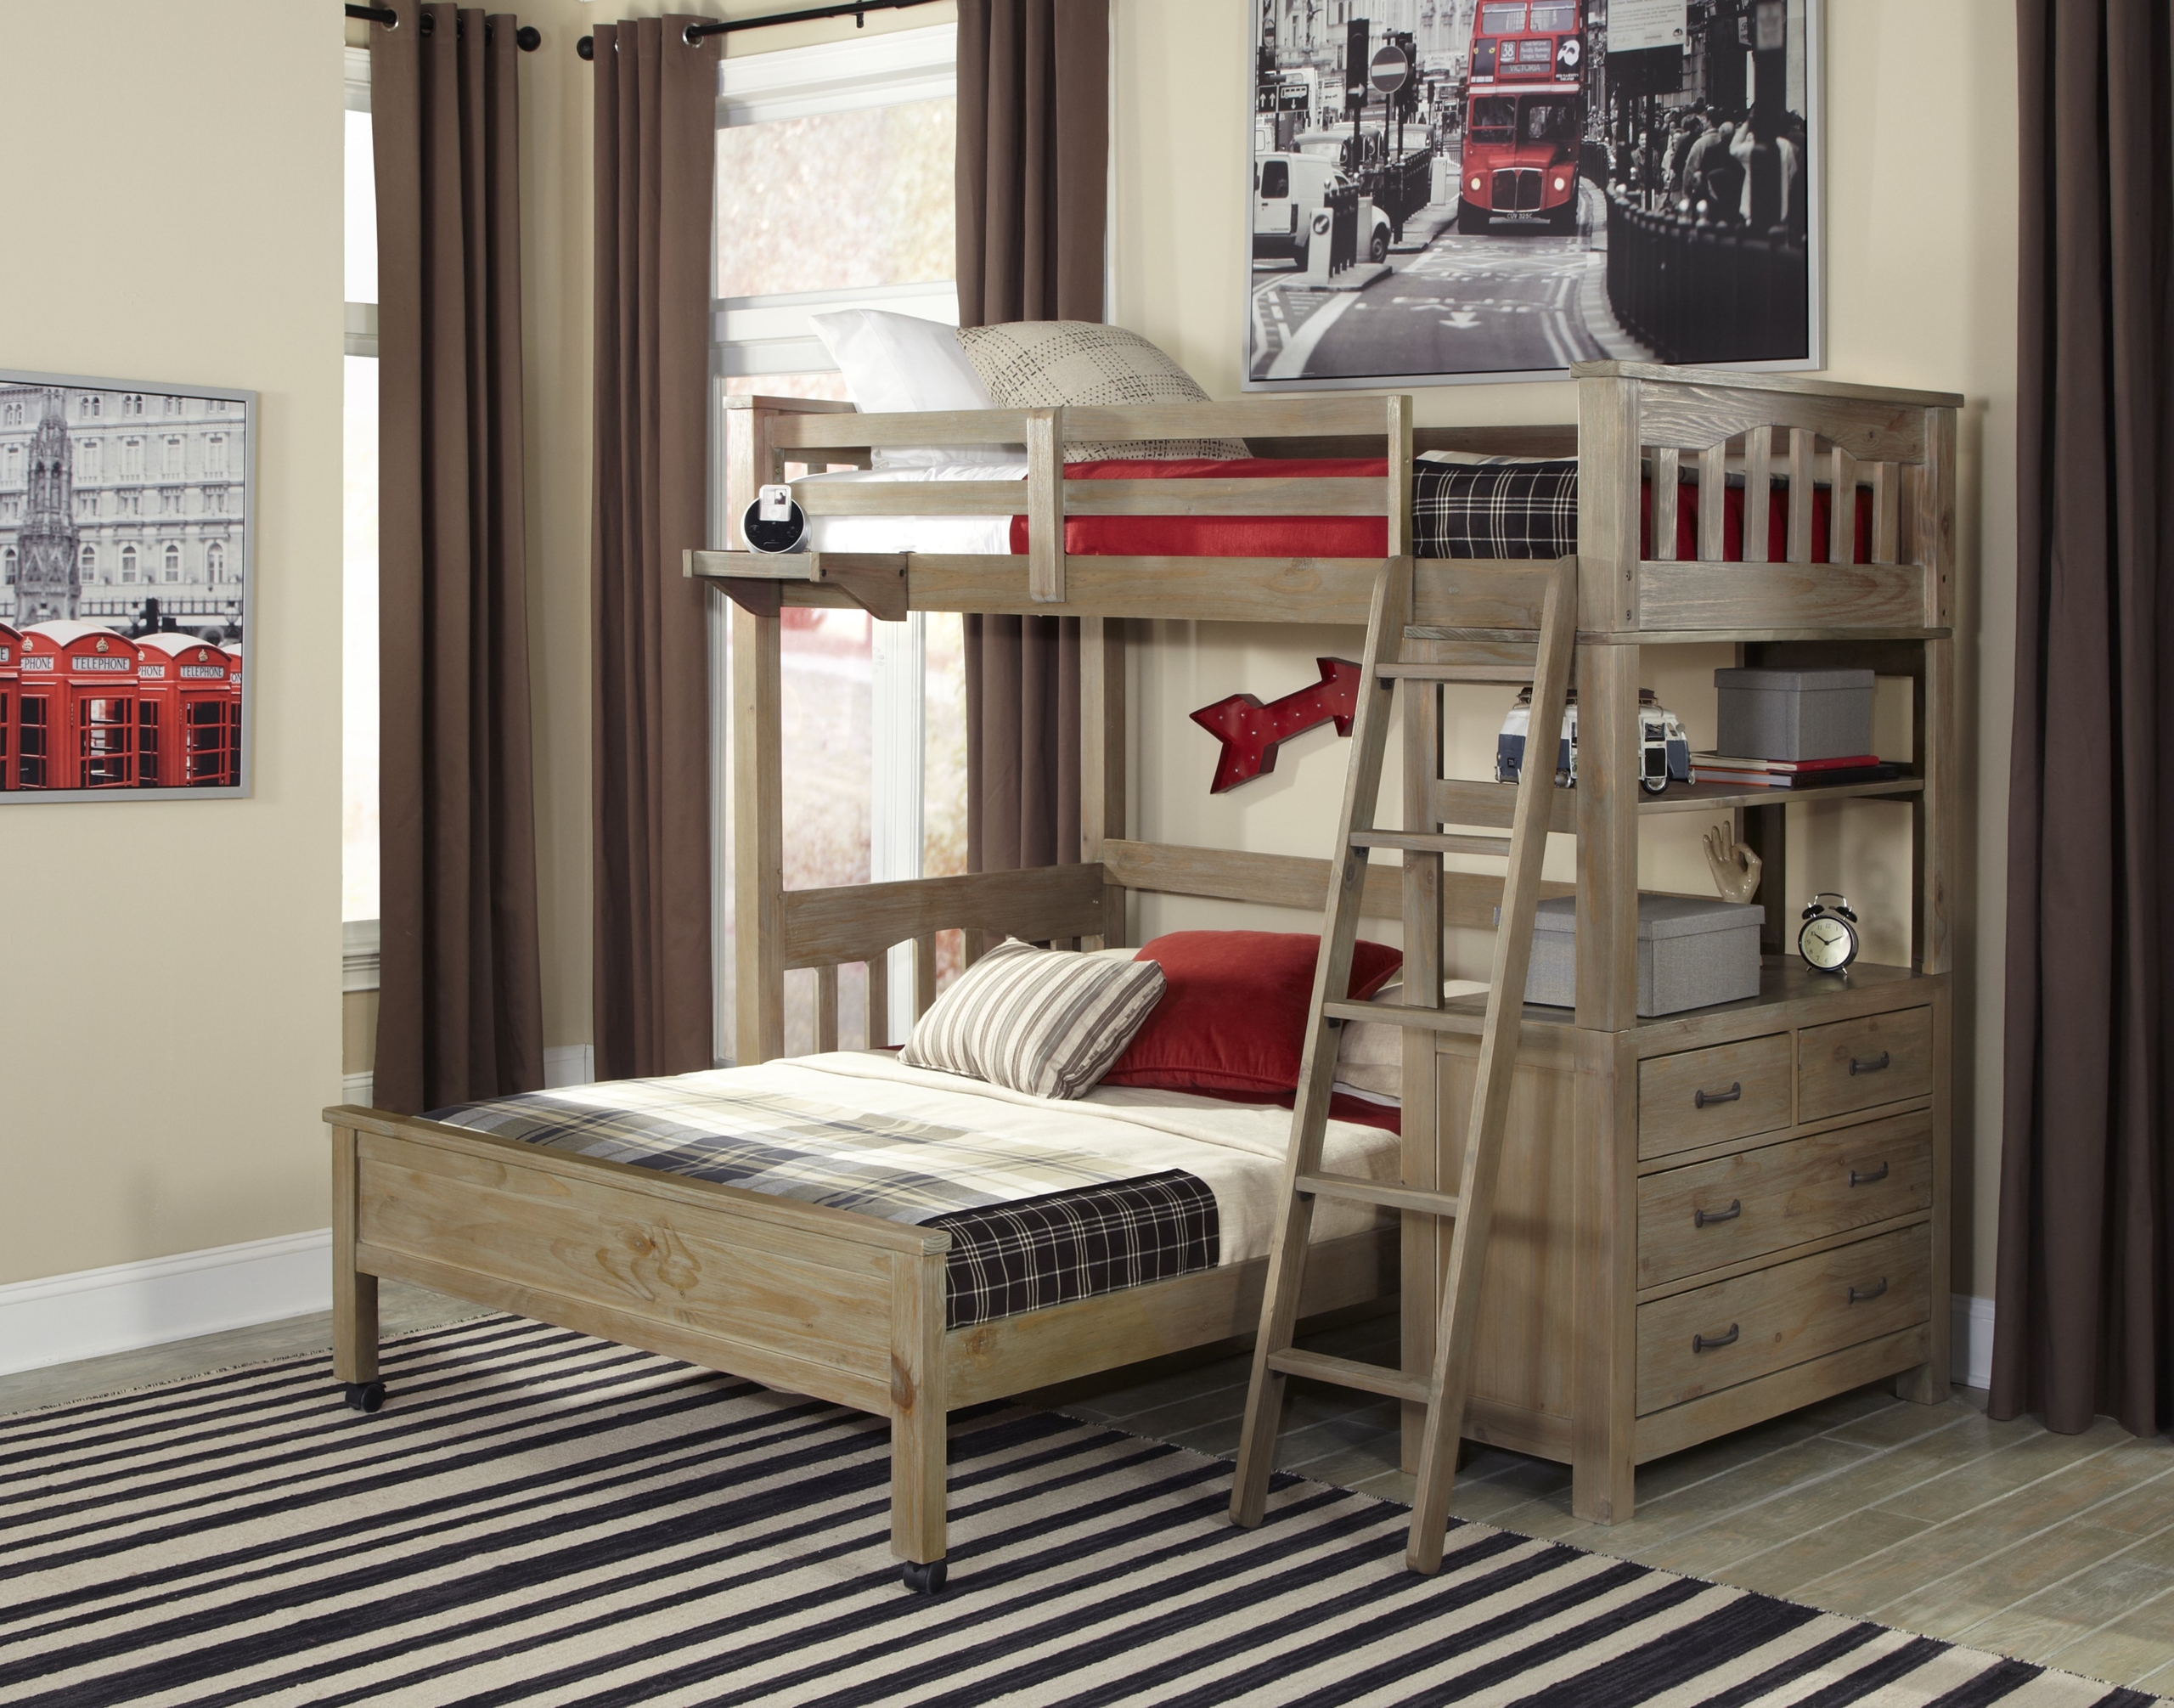 L Shaped Bunk Bed Ideas On Foter